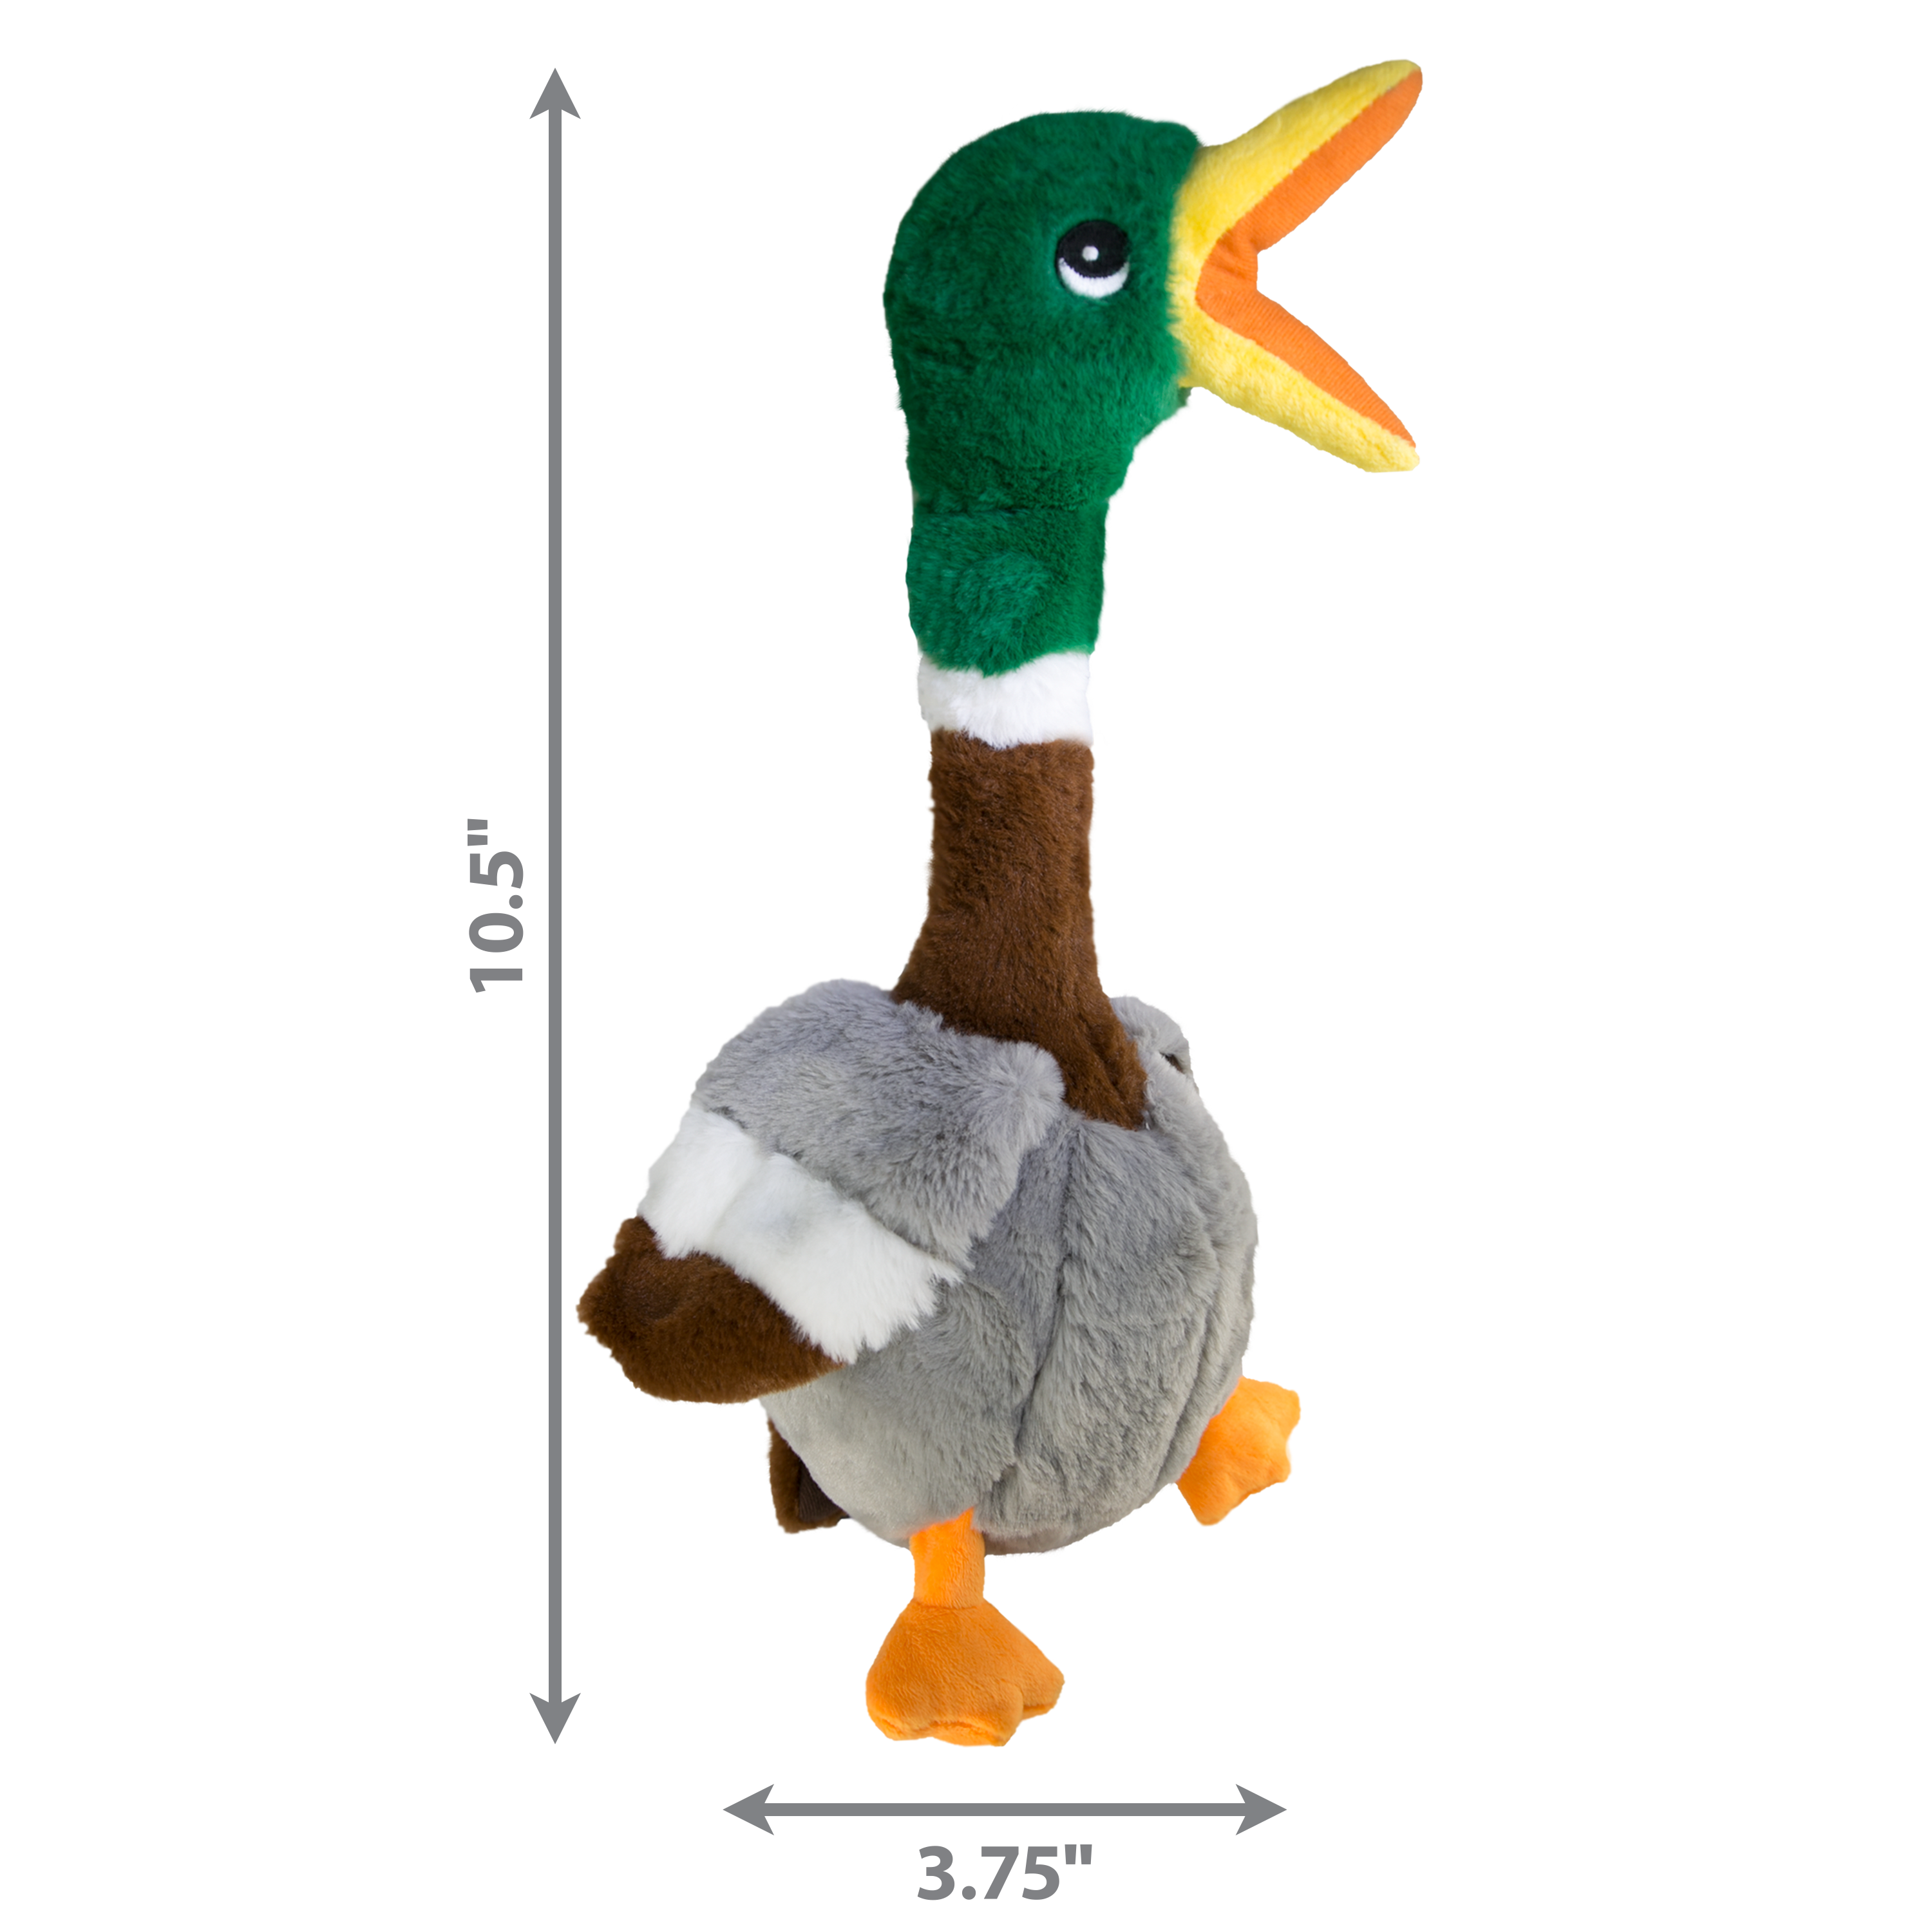 Shakers Honkers Duck dimoffpack product image